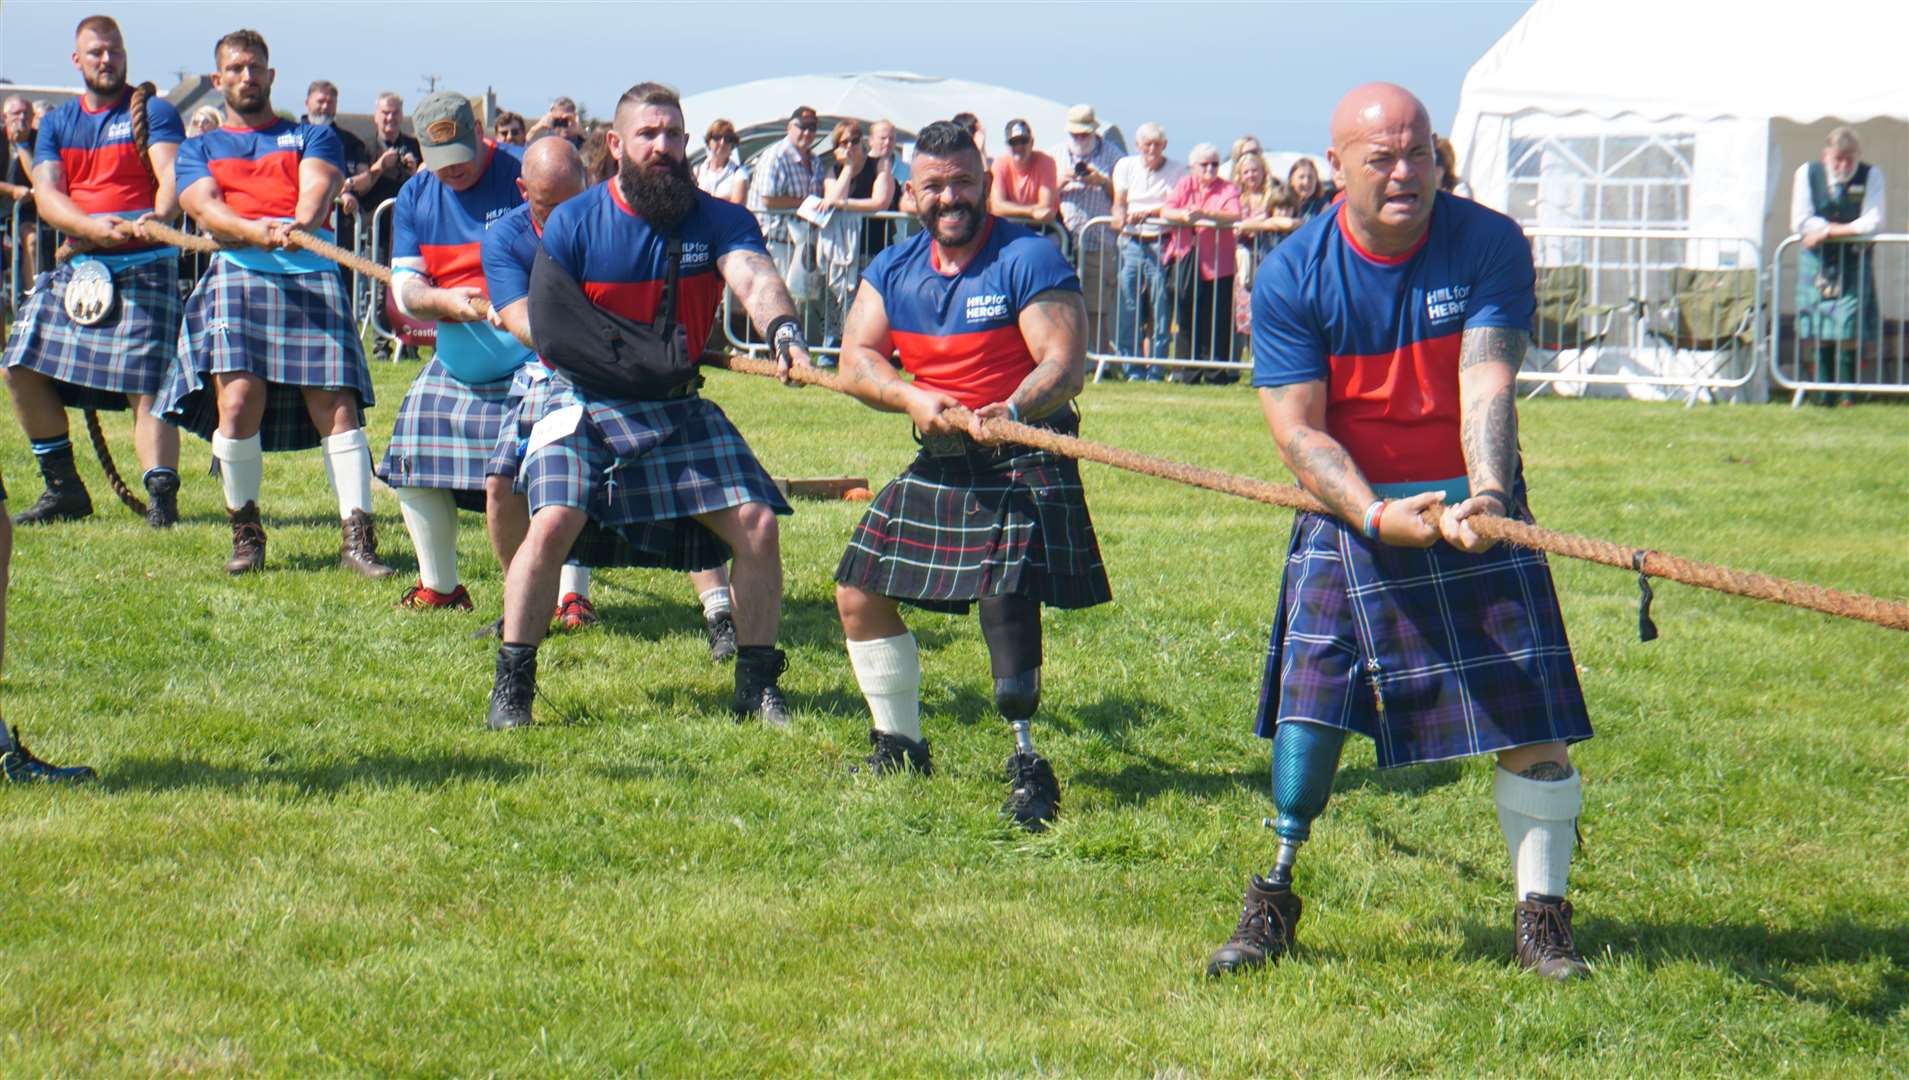 Tug of war team at last year's Mey Highland Games. Picture: DGS